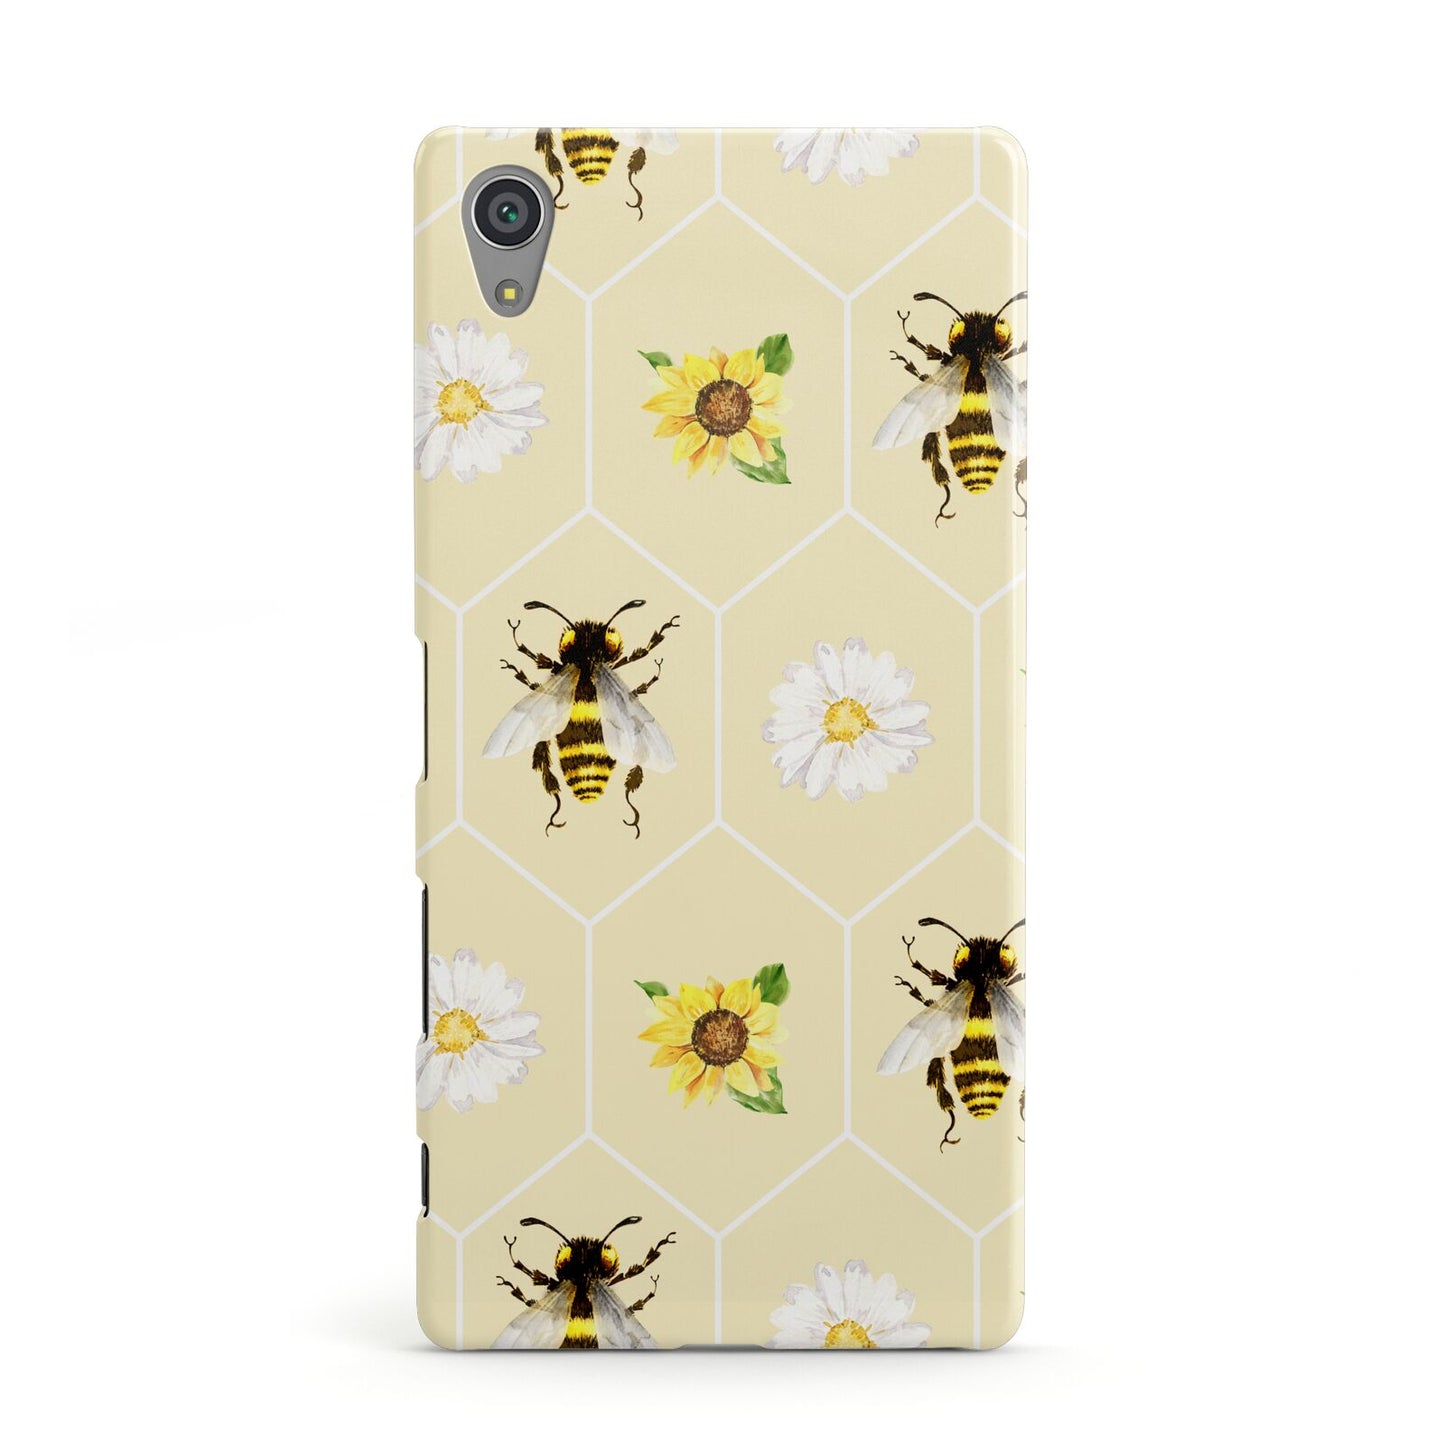 Daisies Bees and Sunflowers Sony Xperia Case